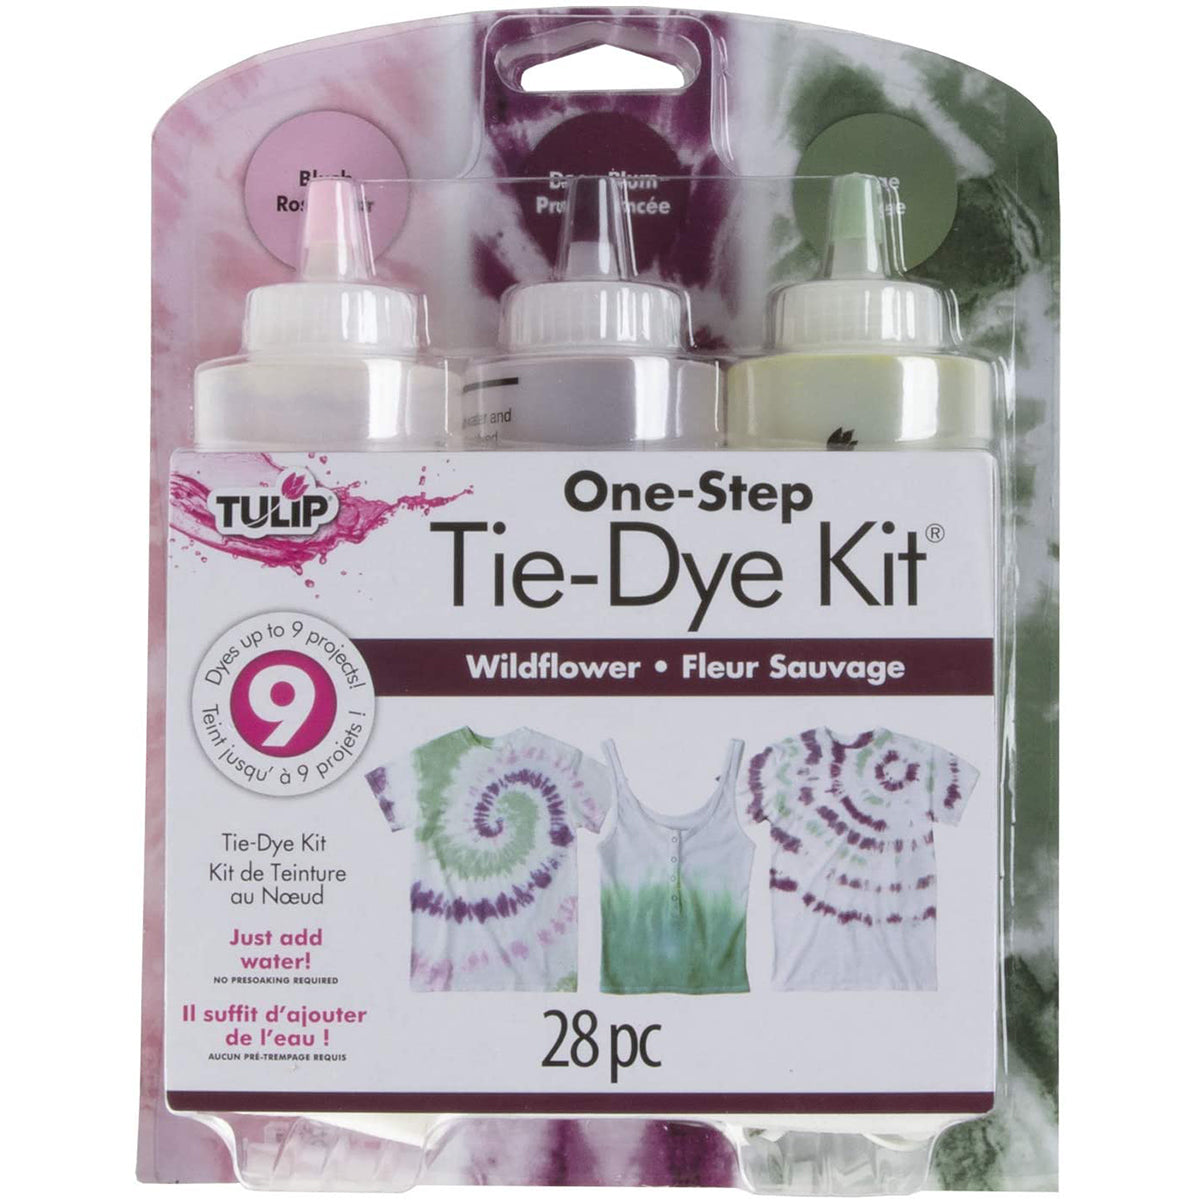 #Beyou Tie Dye Kit With 3 Colors